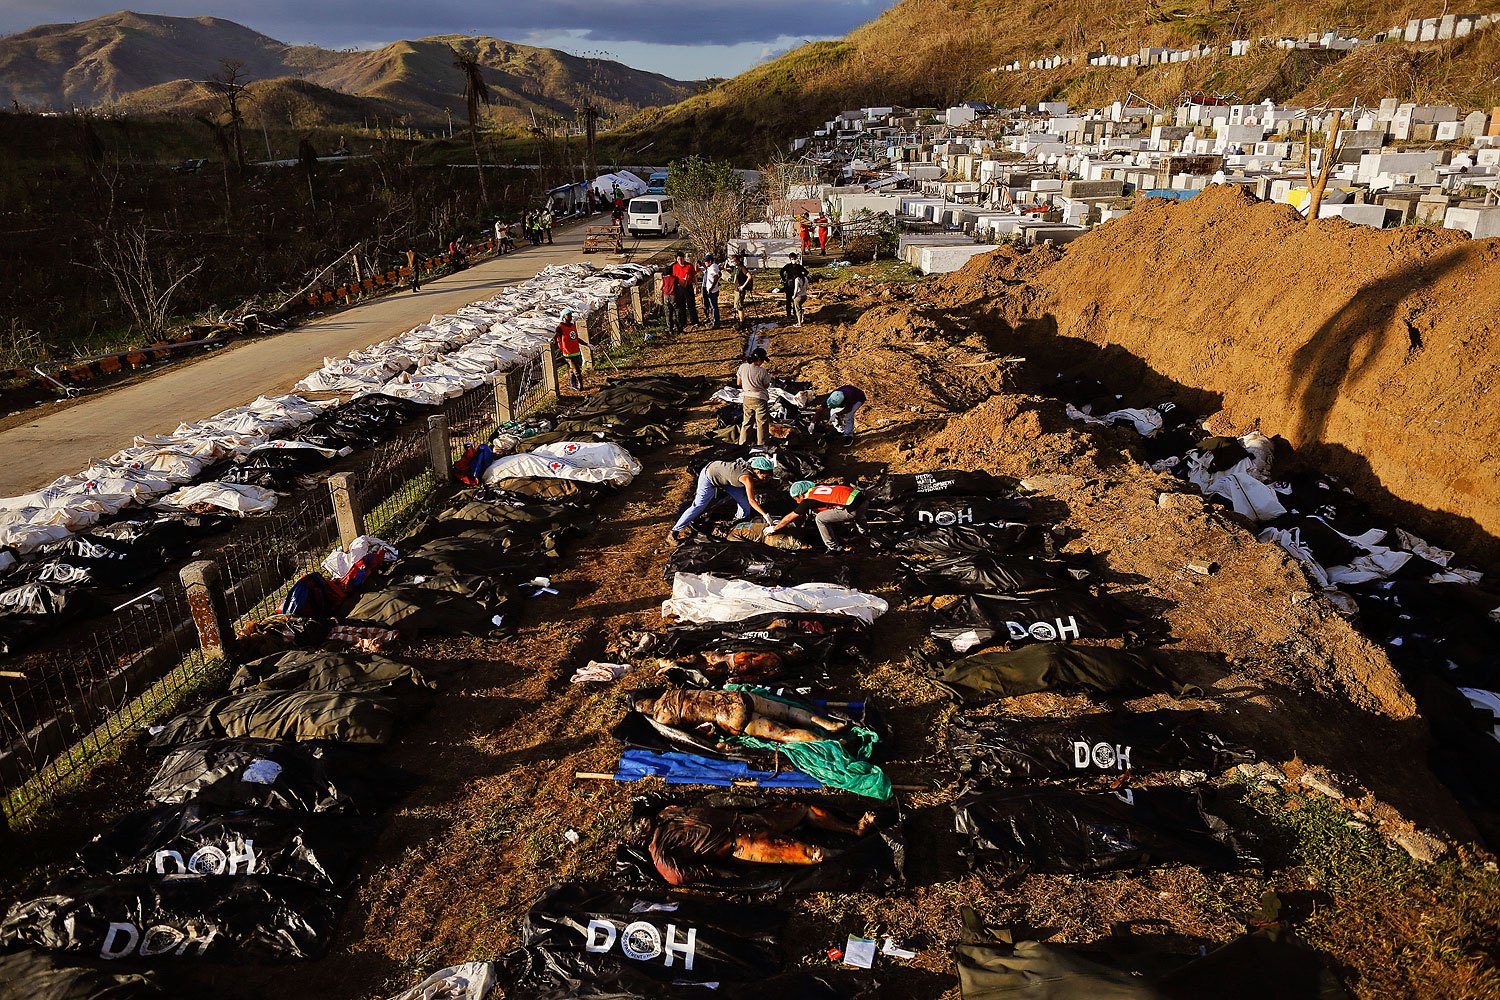 Forensic experts work on a mass grave with more than 700 bodies of victims of Typhoon Haiyan just outside Tacloban on November 18, 2013.